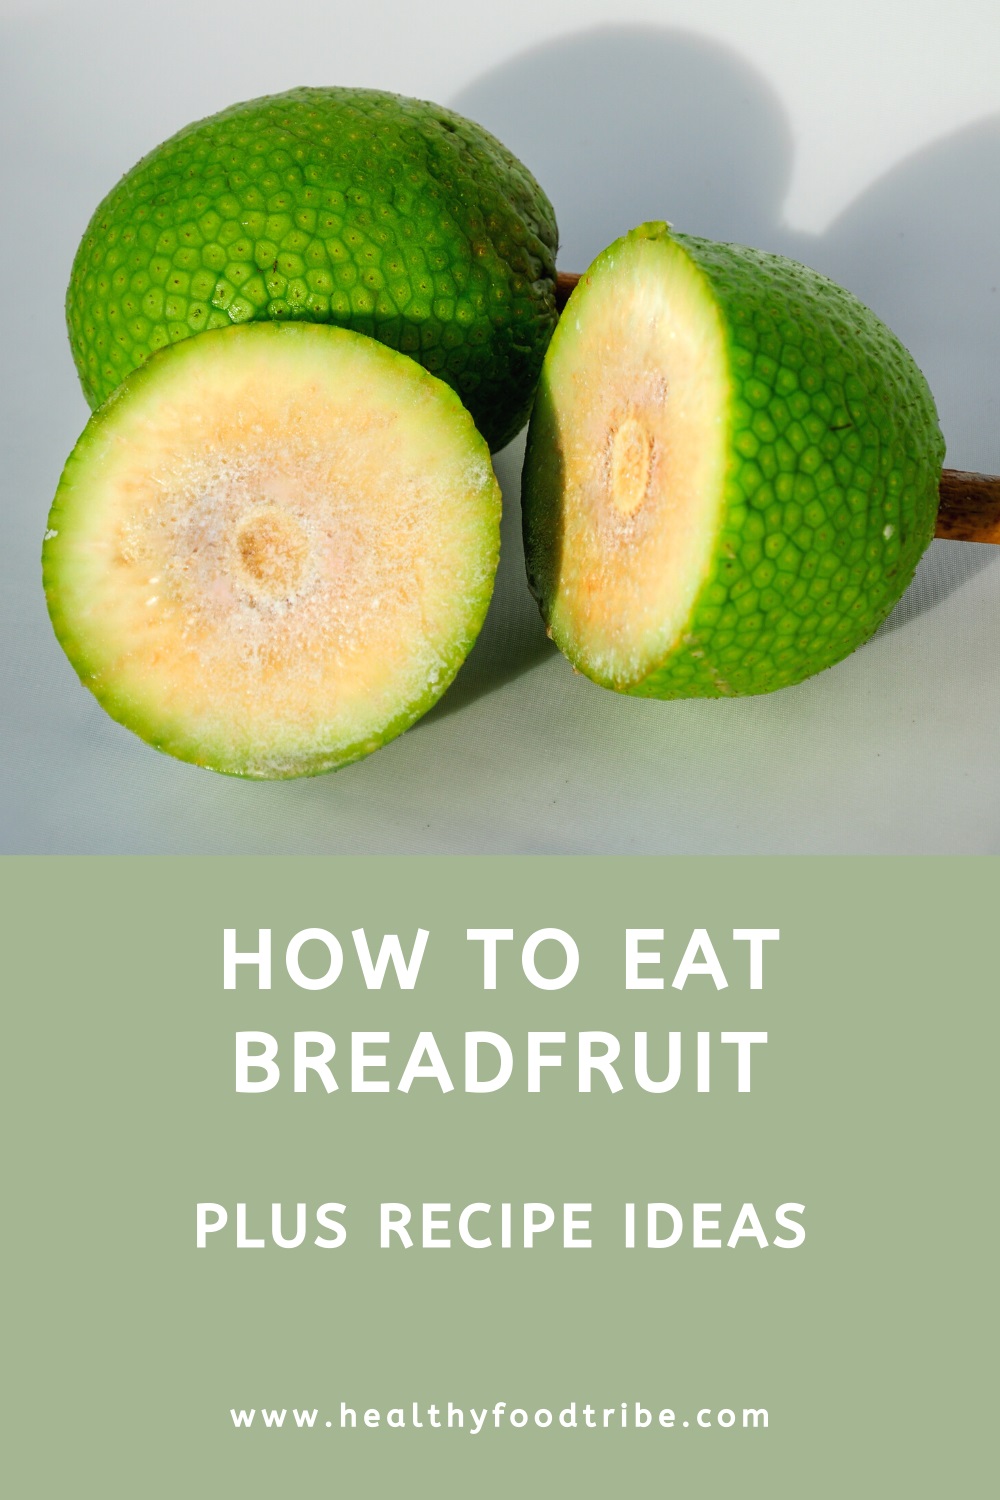 How To Cut And Eat Breadfruit Practical Guide